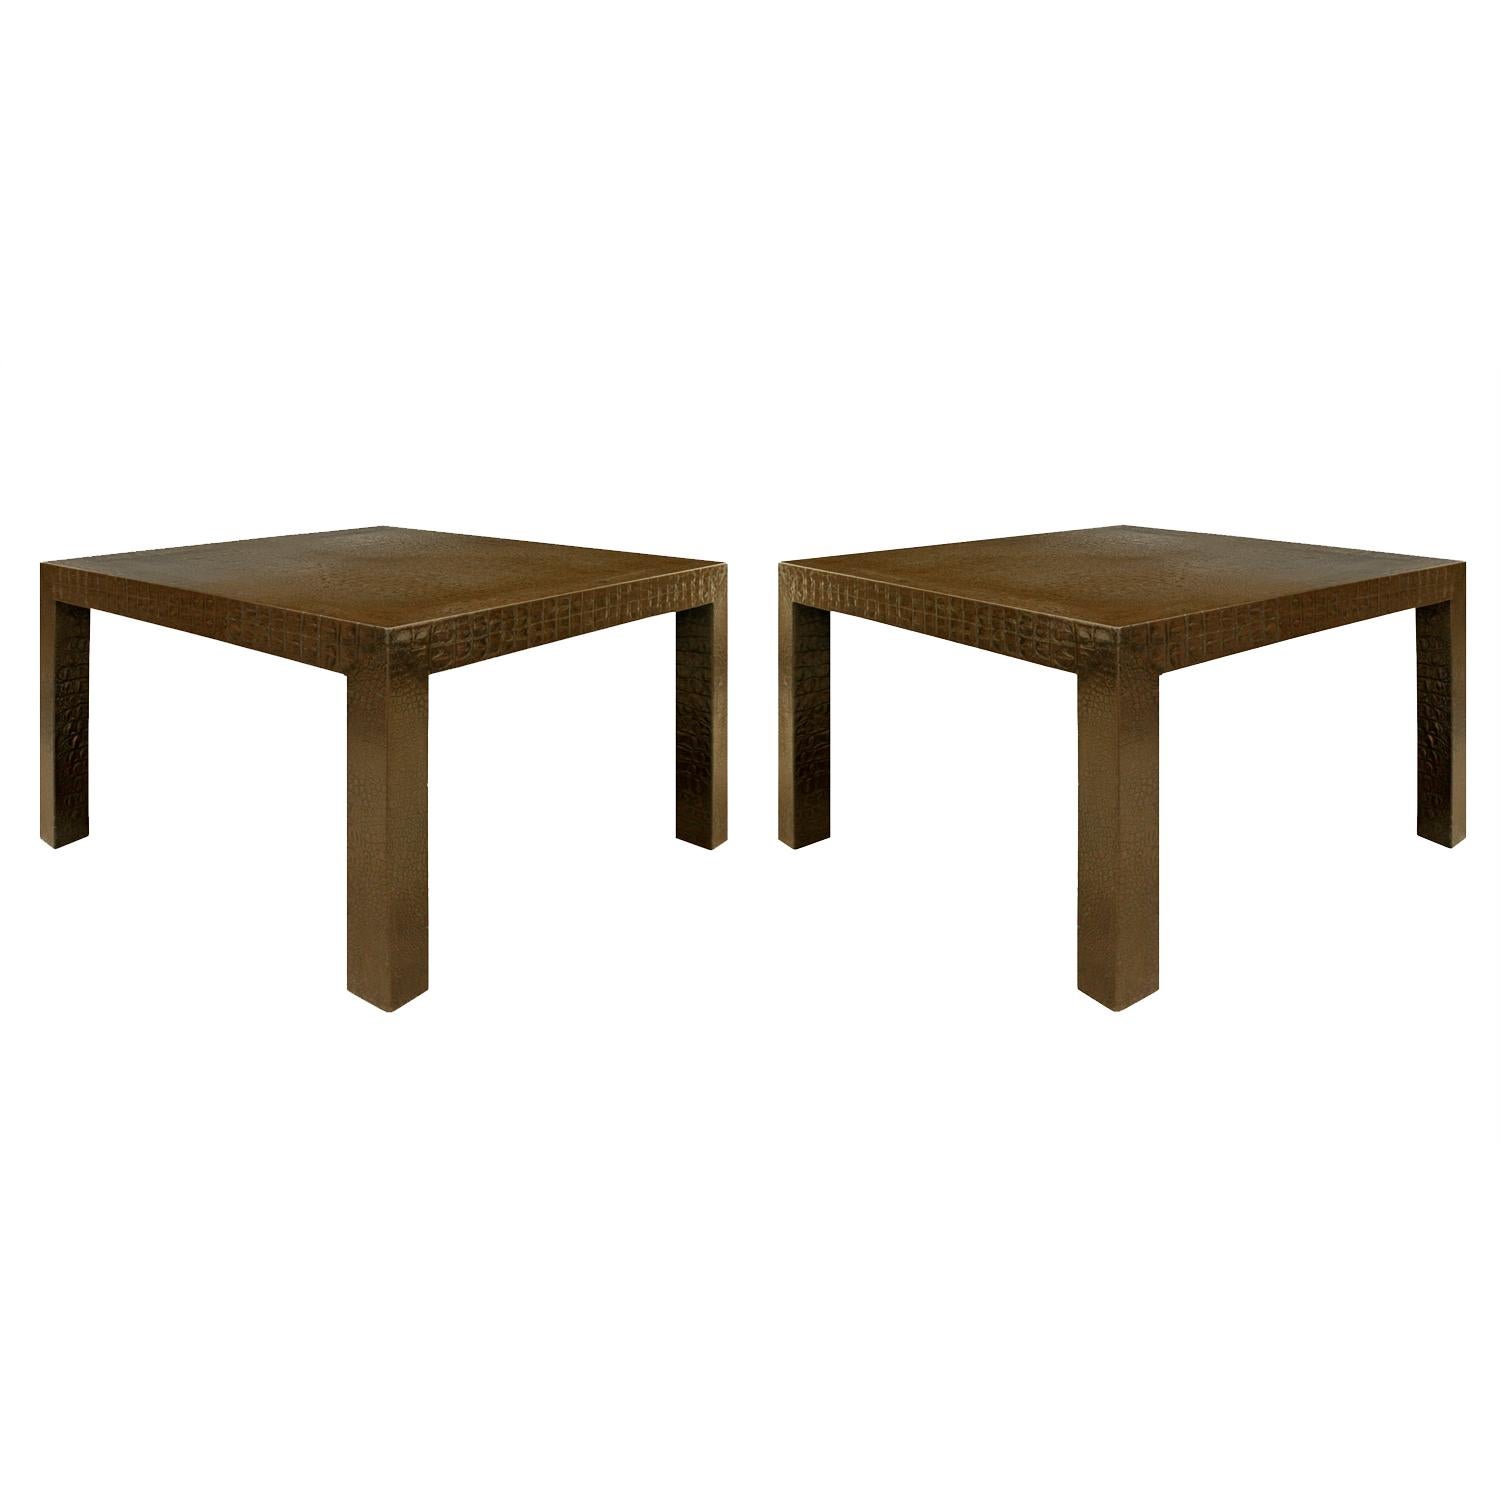 Pair of large parsons style end tables covered in dark brown embossed crocodile leather by Karl Springer, American 1970's. The meticulous craftsmanship and scale of these tables make them special.